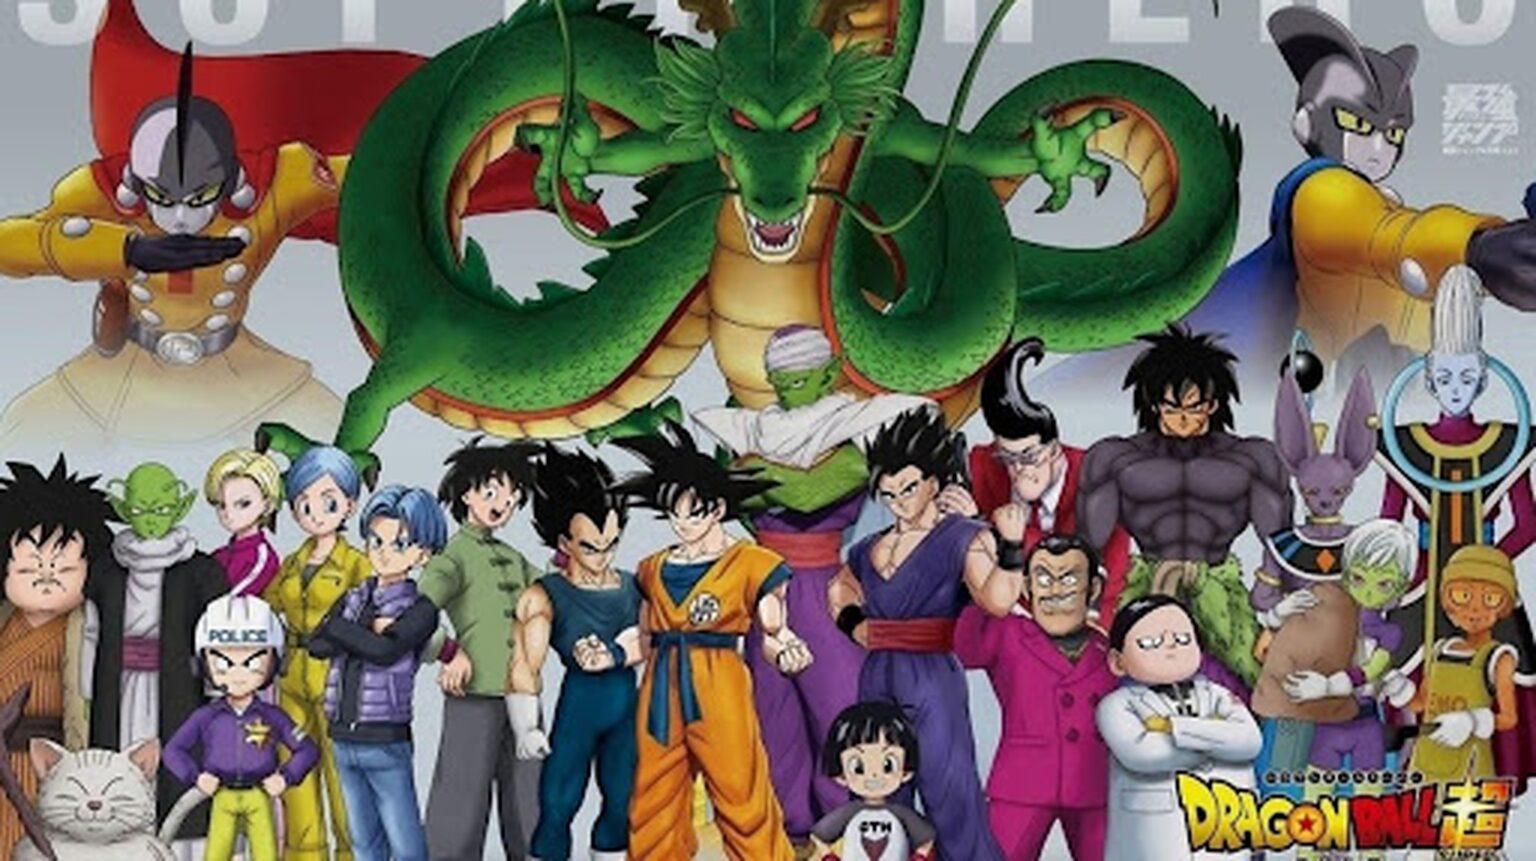 'Dragon Ball Super: Super Hero' is finally here. Find out how to stream Crunchyroll's new anime action movie online for free!